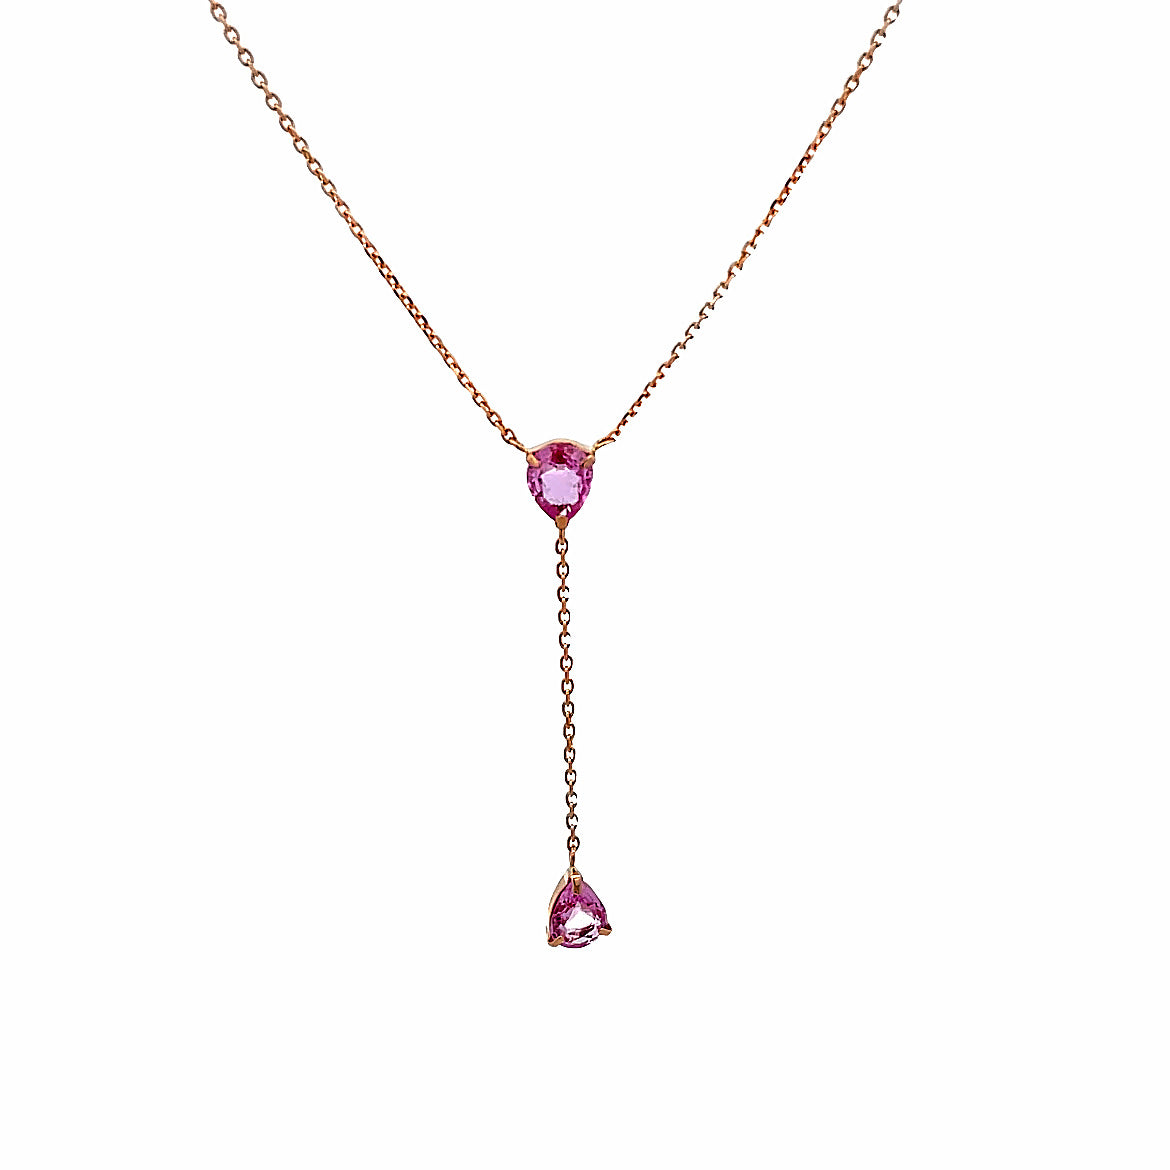 18K ROSE GOLD DIAMOND LARIAT PEAR CUT NECKLACE WITH PINK SAPPHIRE